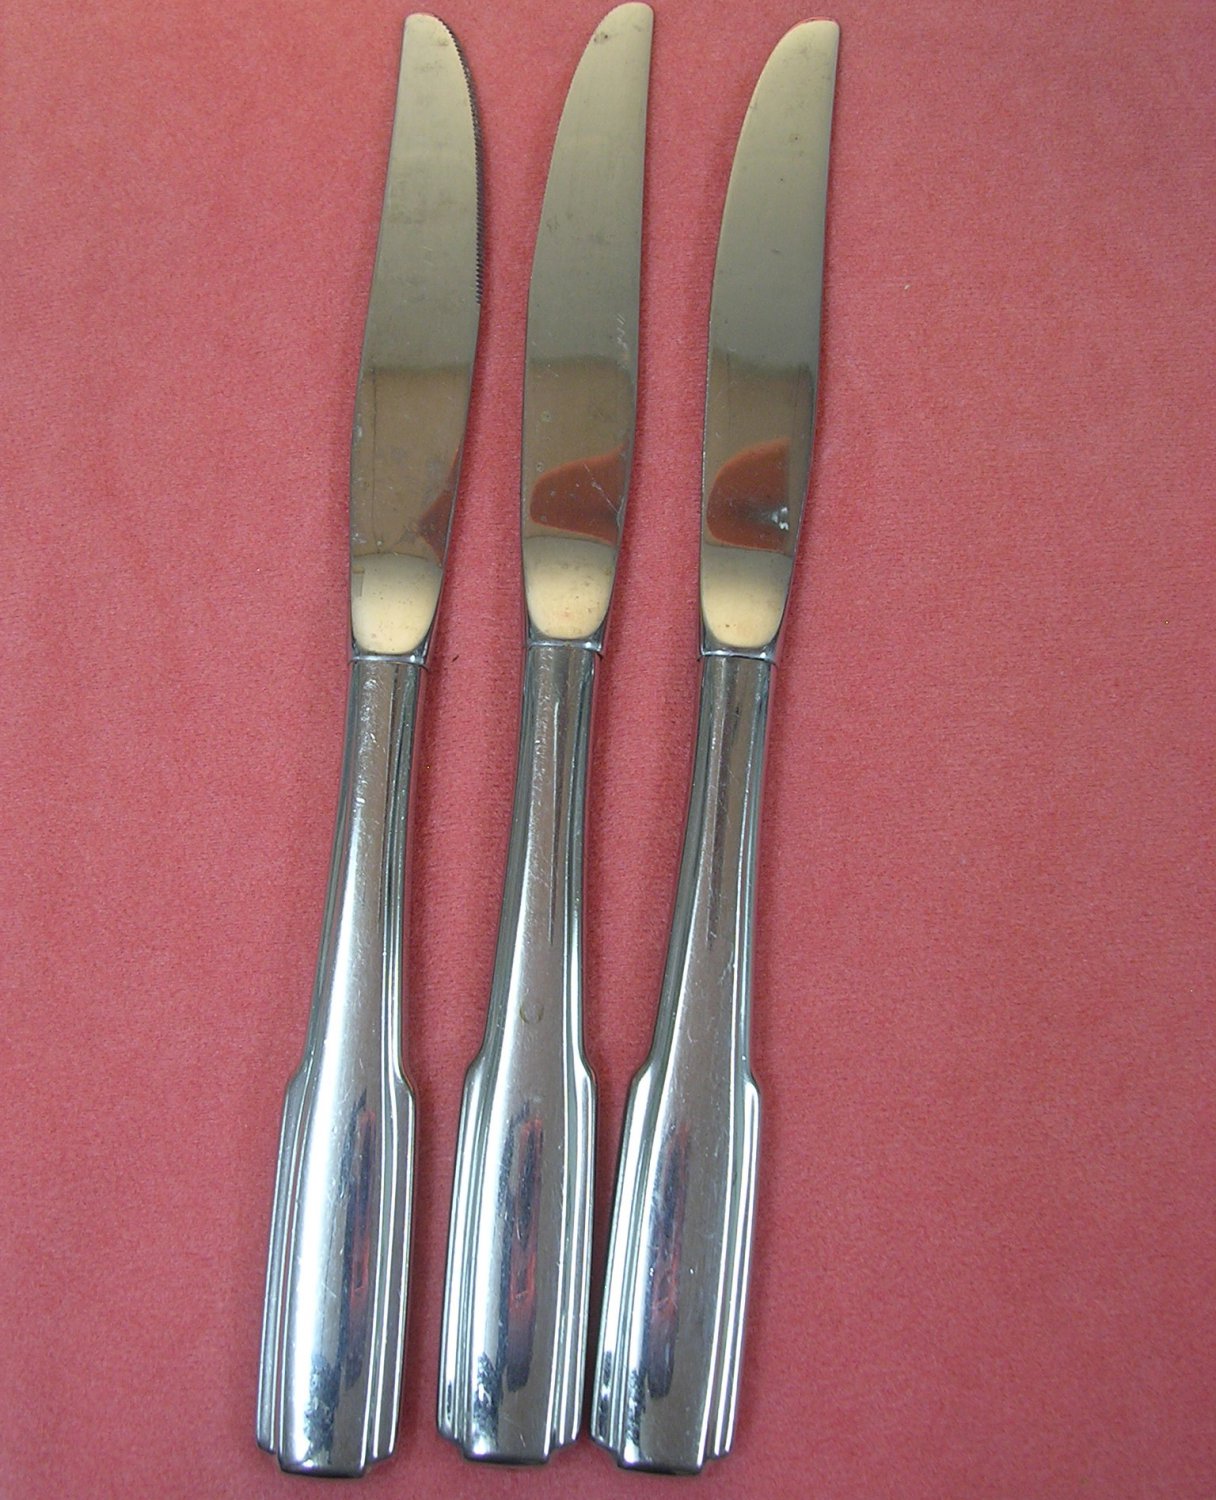 Details about   3pc Serving Tablespoon Meat Fork Sugar Oneida FREMONT Glossy Stainless Flatware 